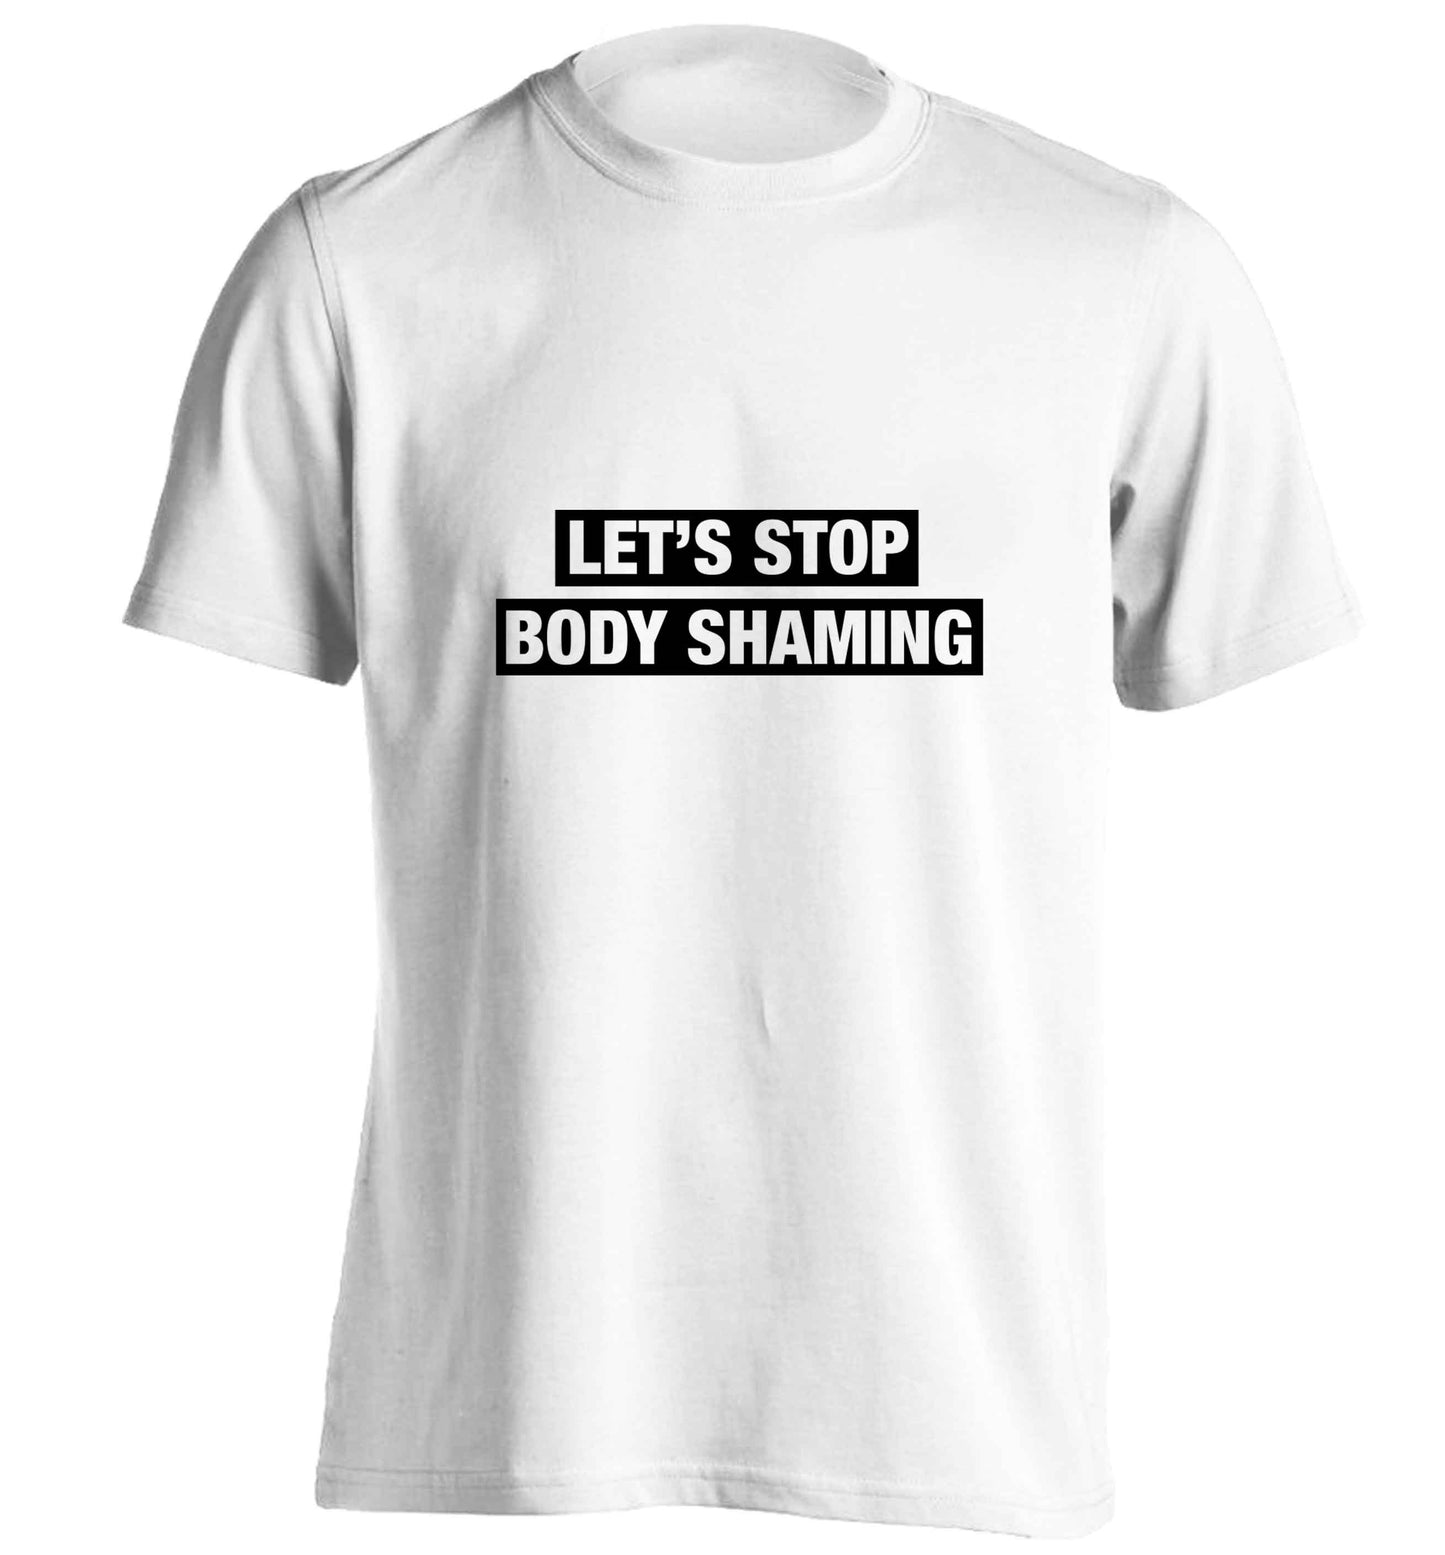 Let's stop body shaming adults unisex white Tshirt 2XL